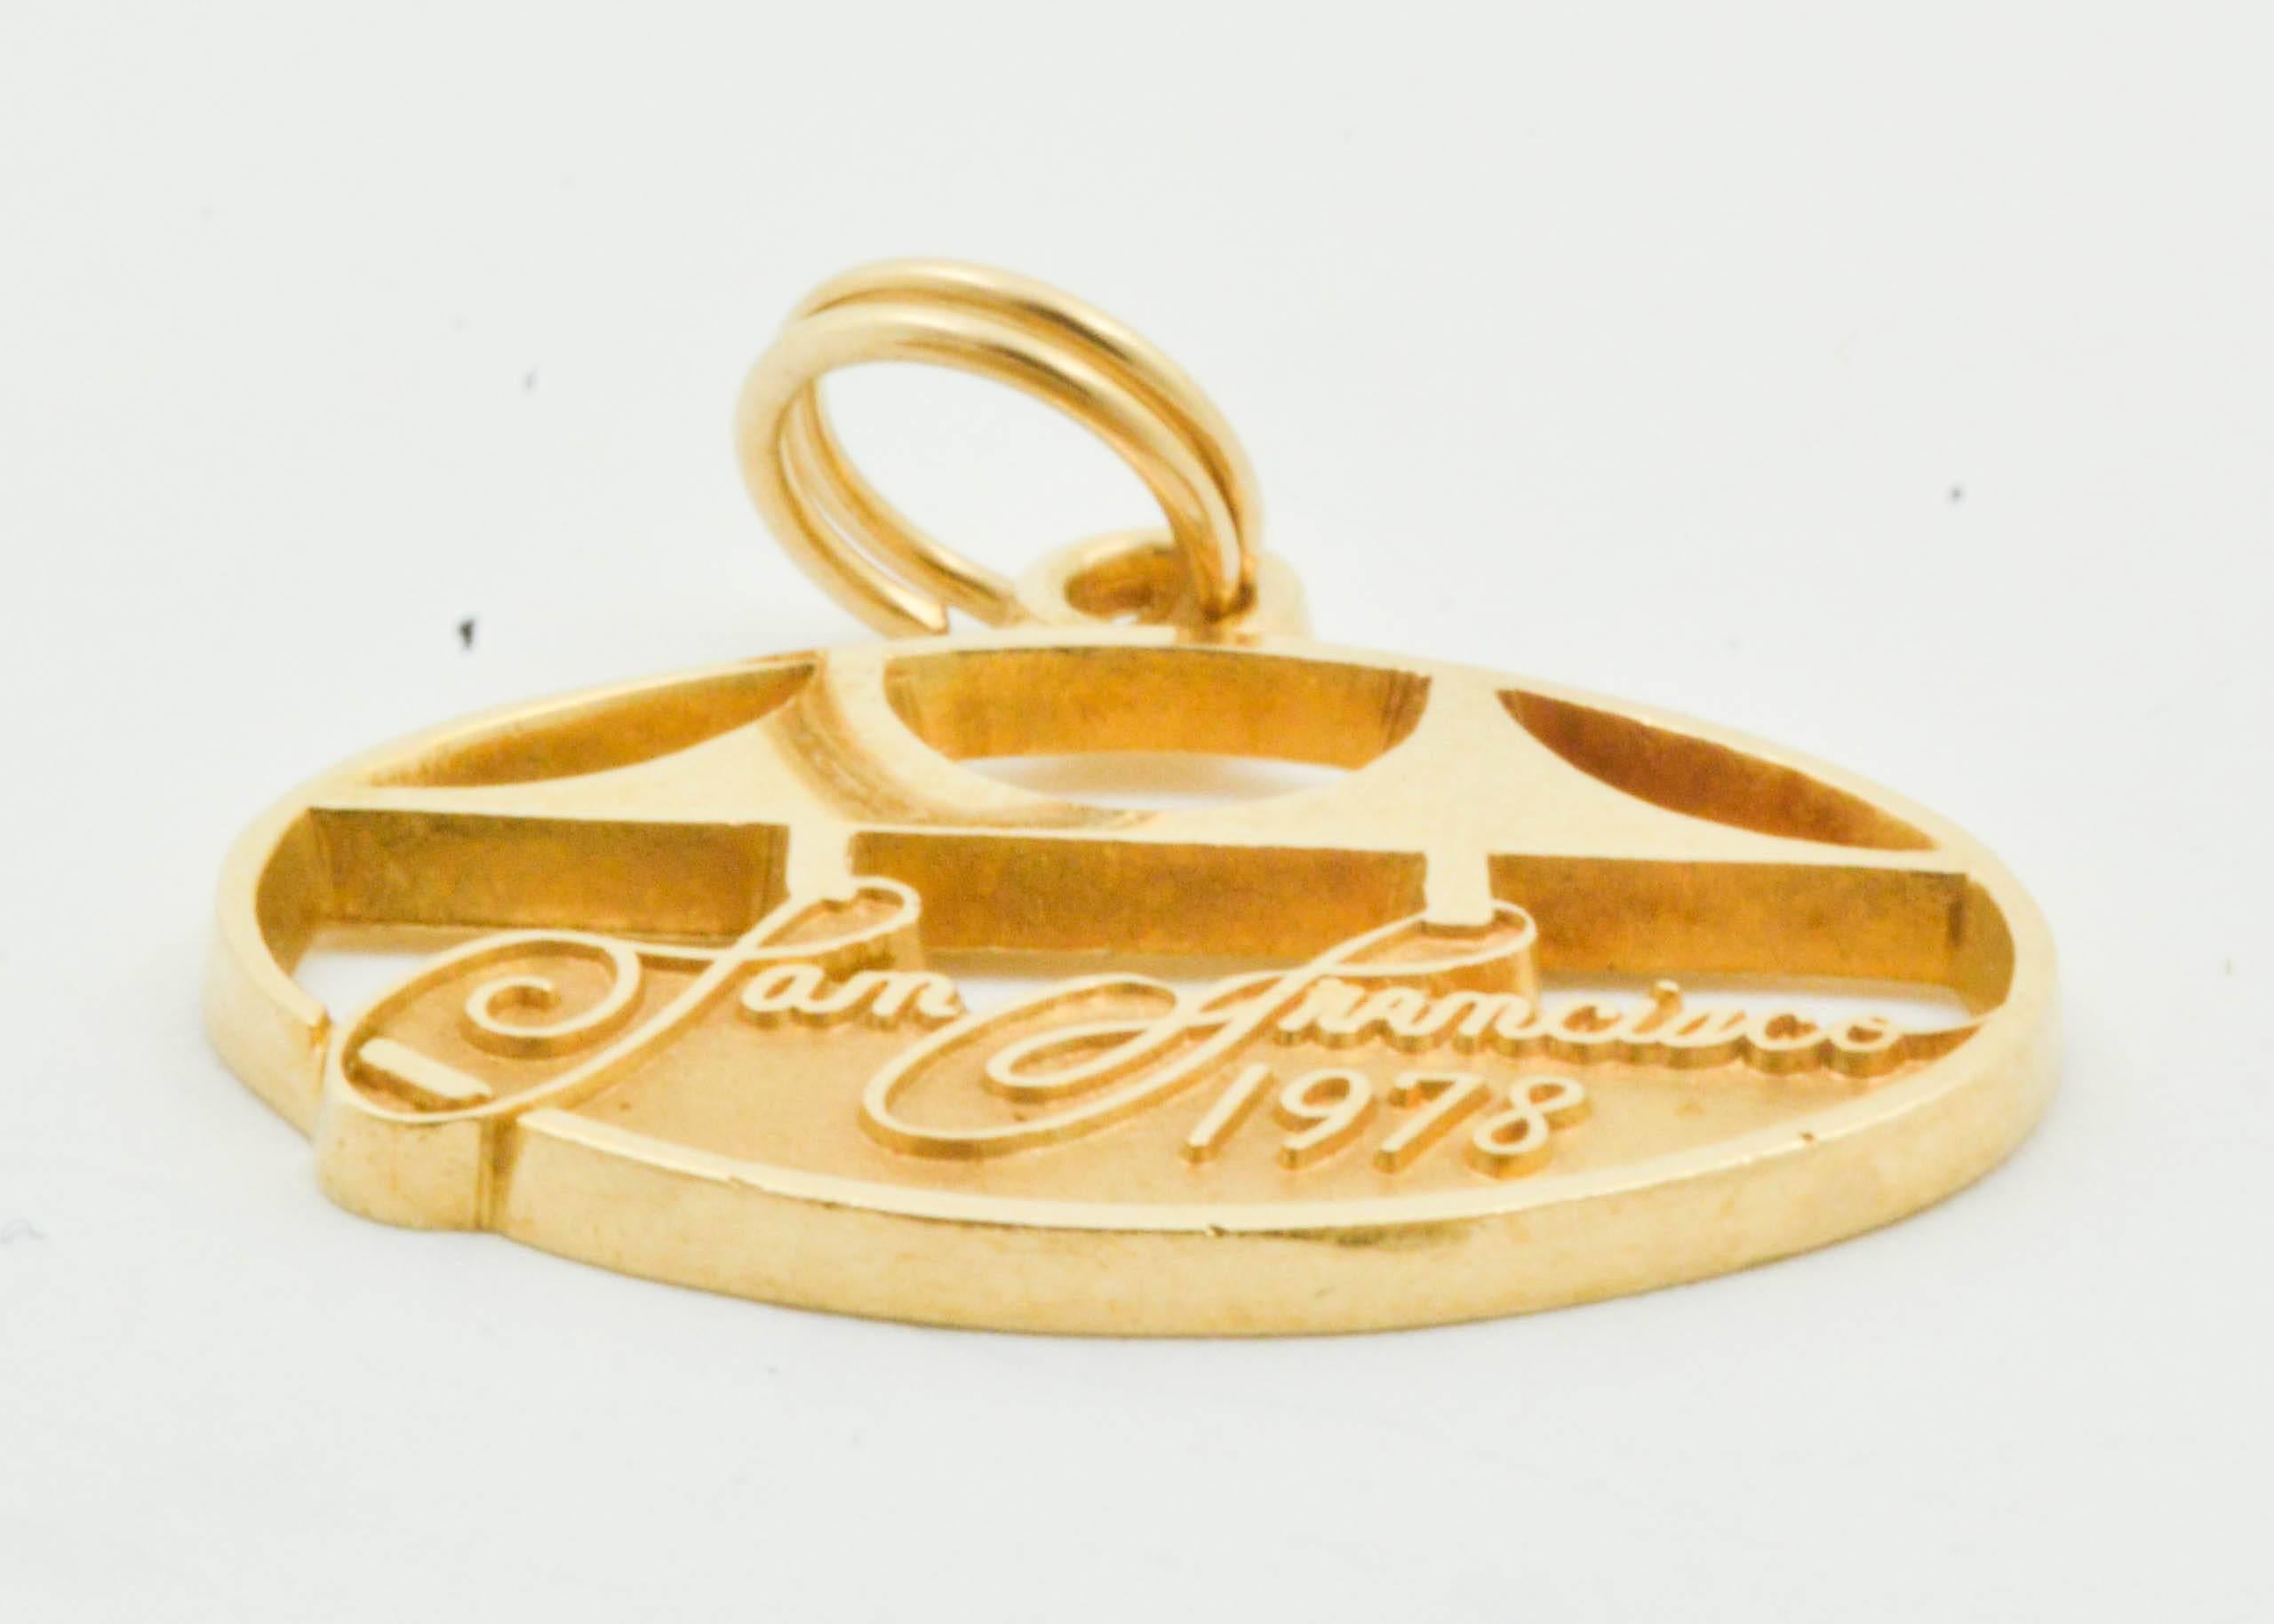 Fashioned in 10kt yellow gold, this charm depicts a stylized representation of the Golden Gate Bridge with “San Francisco 1978” embossed below it. This oval-shaped charm measures 15.86x22.34x1.45mm and weighs 3g.